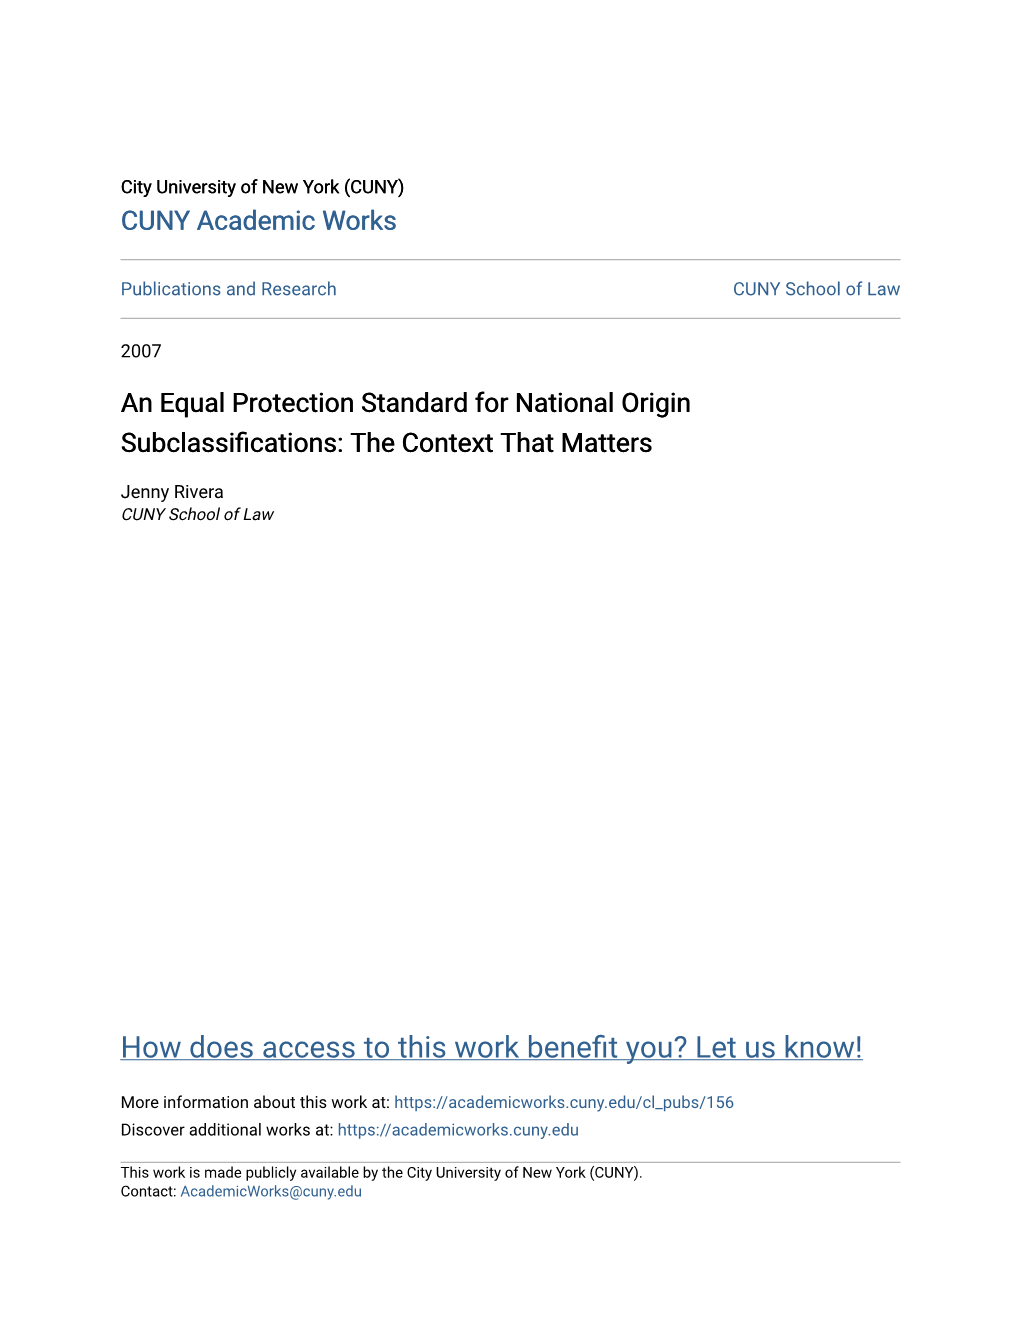 An Equal Protection Standard for National Origin Subclassifications: the Context That Matters